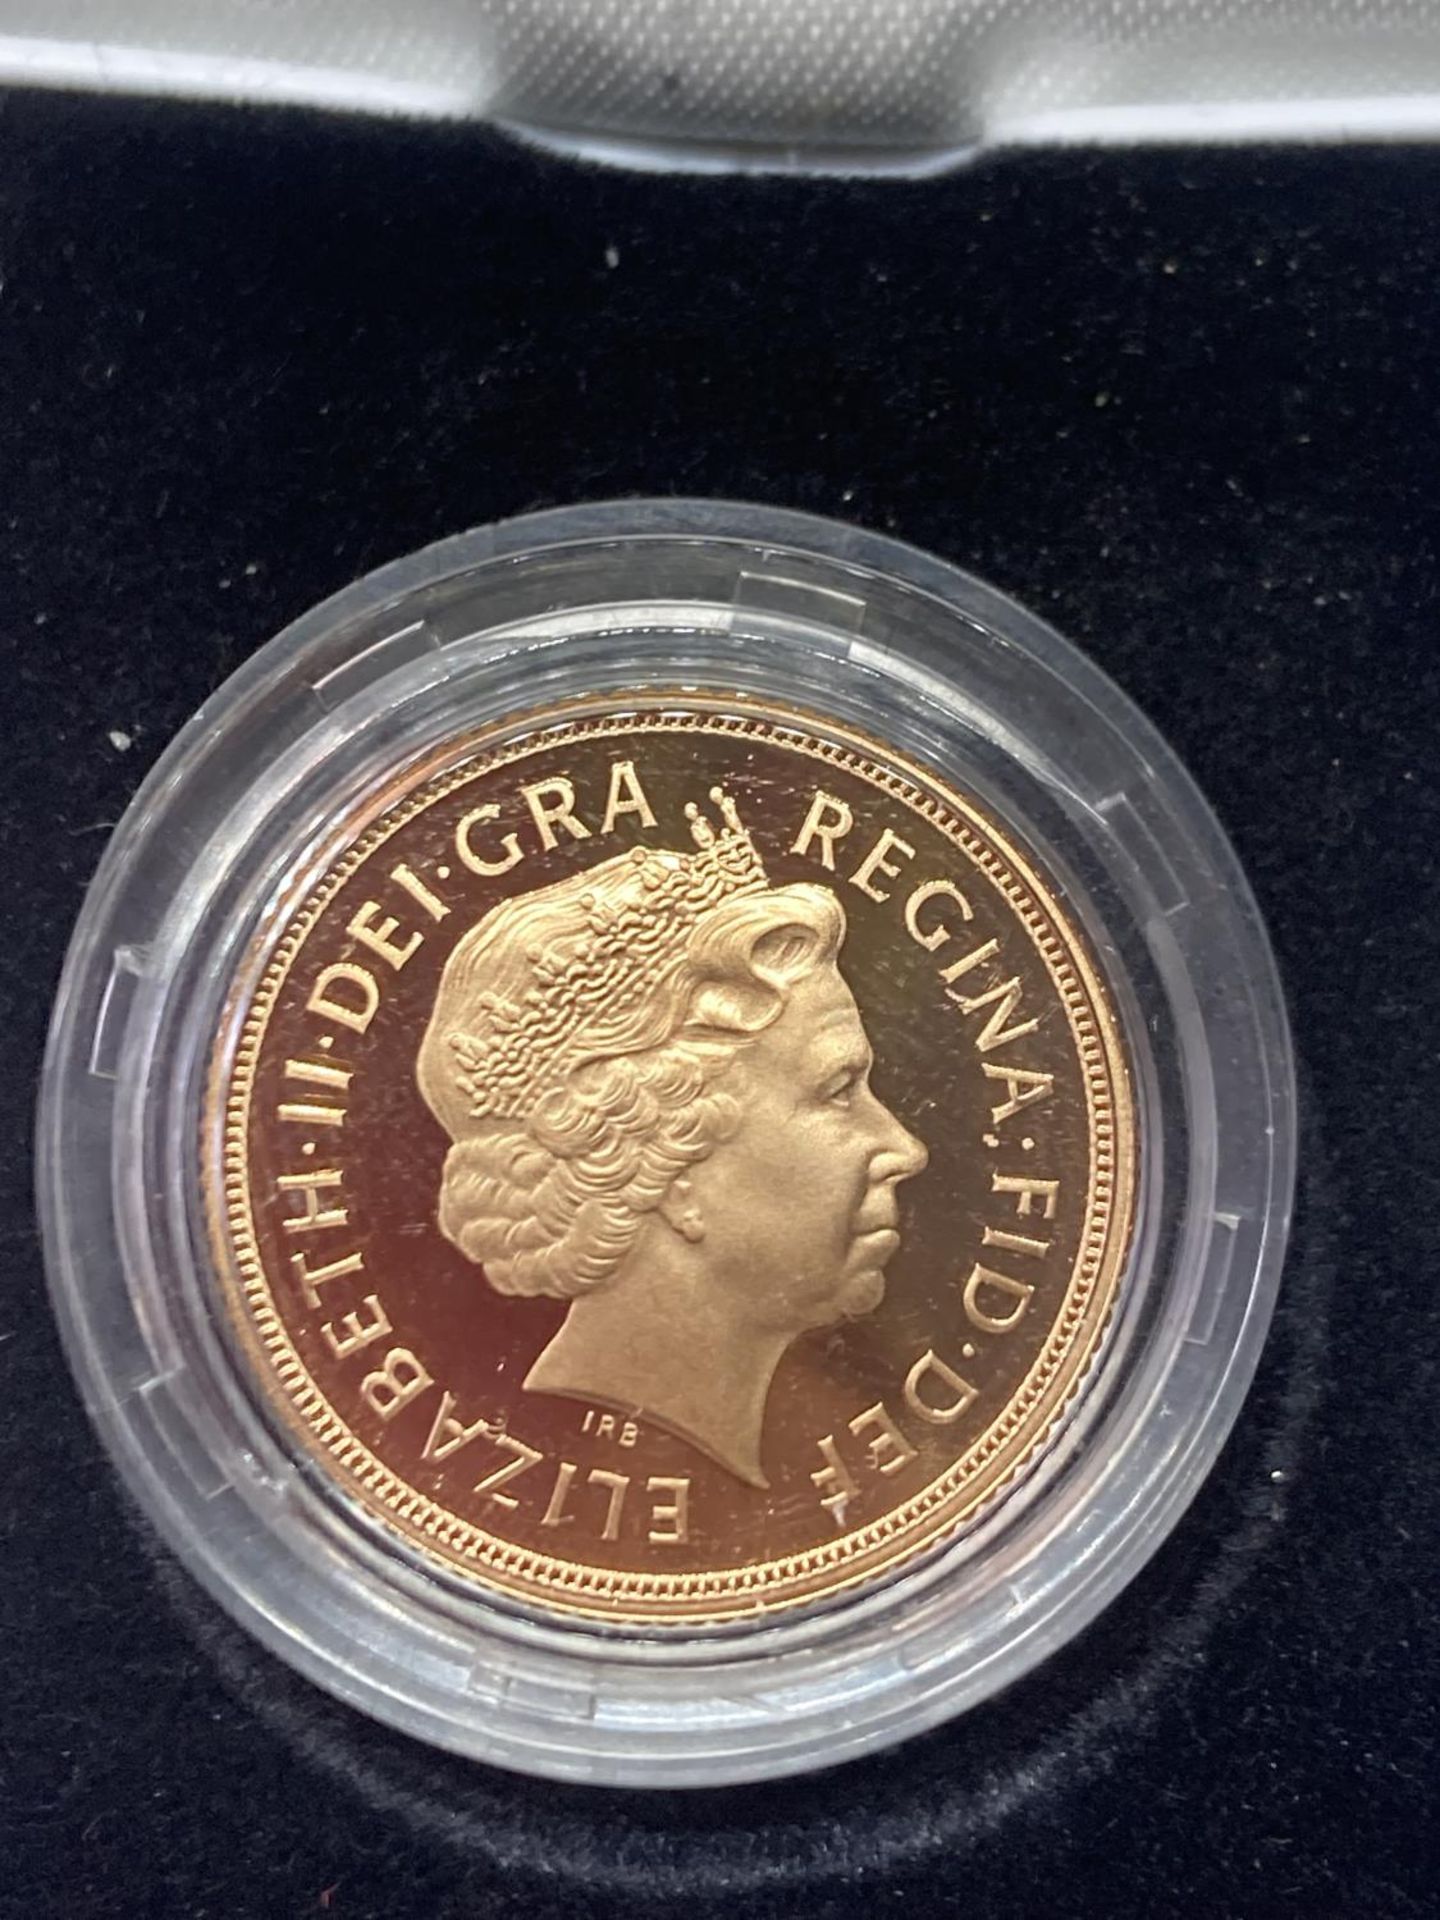 A 2003 GOLD PROOF SOVEREIGN QUEEN ELIZABETH II NO 09985 OF 15,000 IN A PRESENTATION BOX WITH - Image 3 of 5